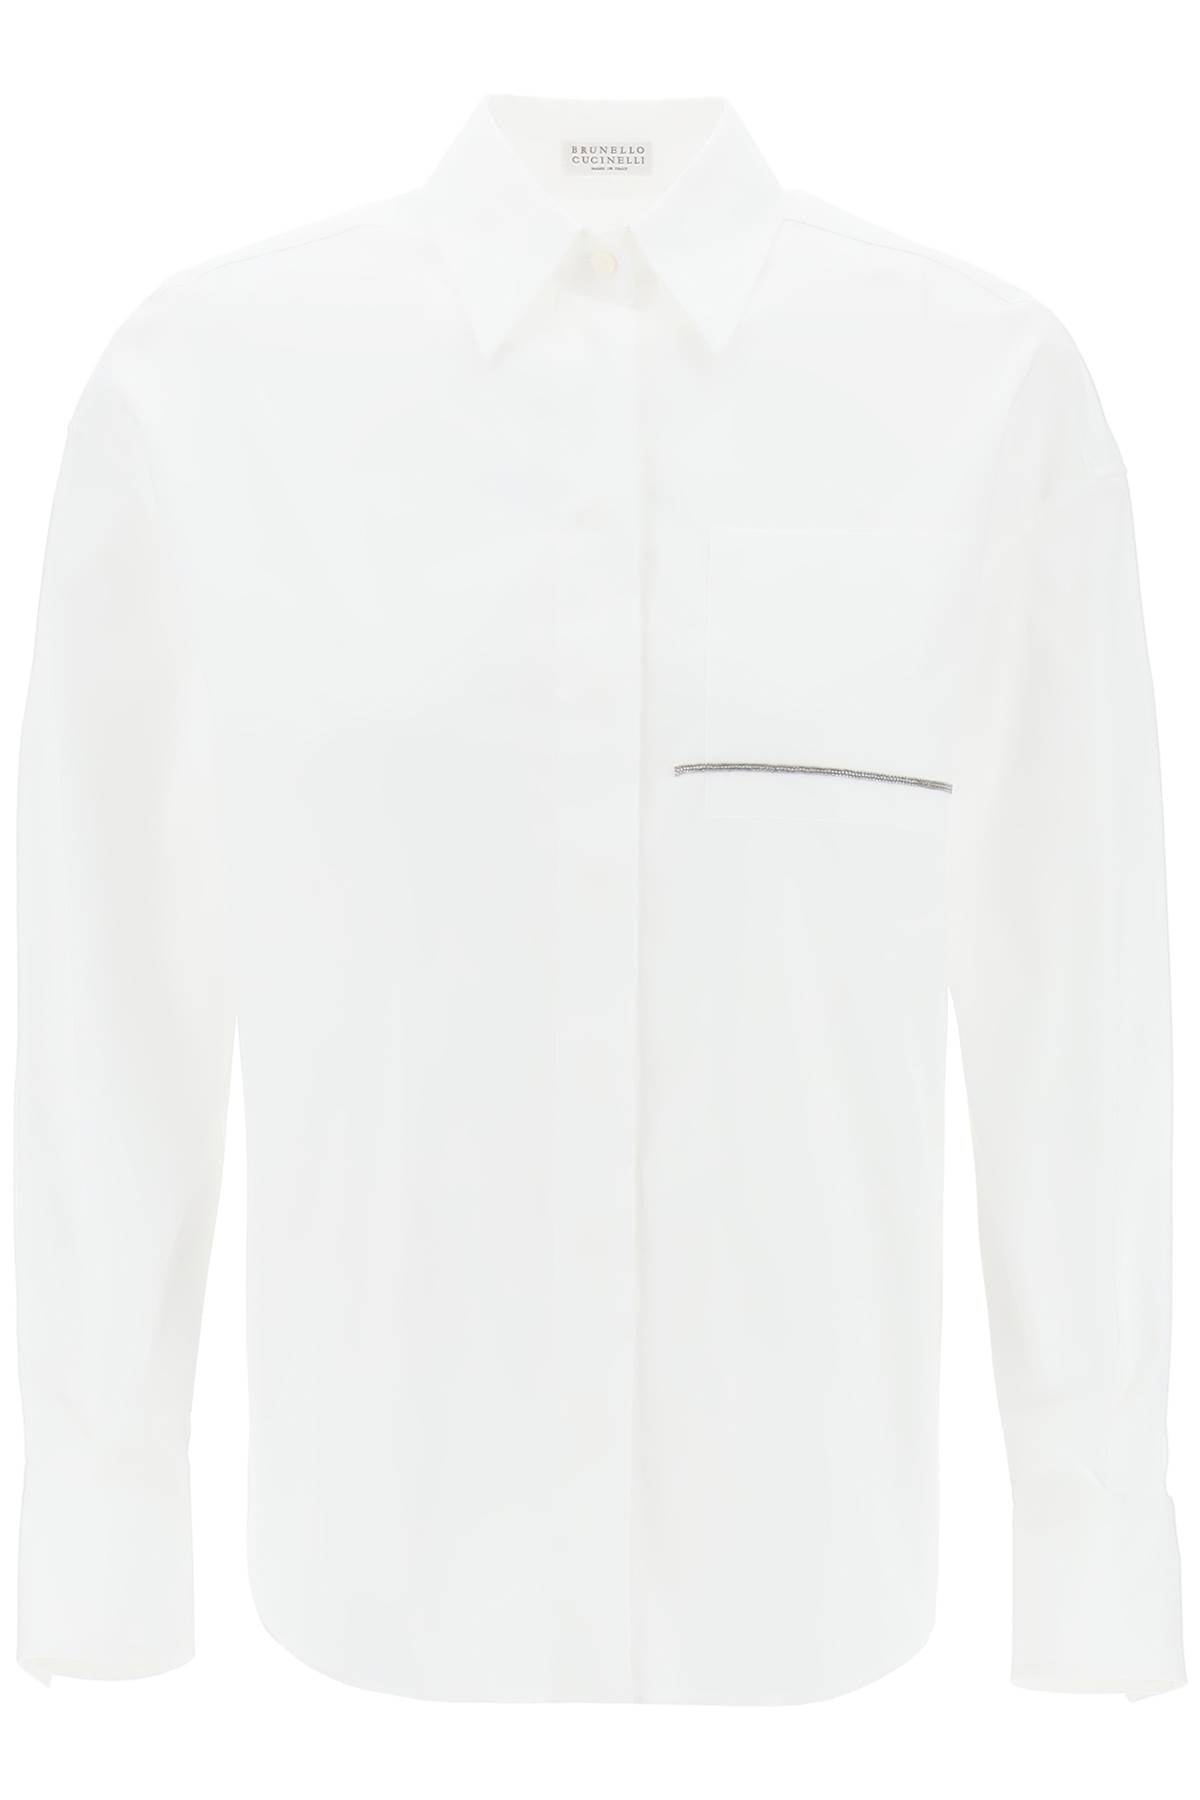 Brunello cucinelli "shirt with jewel detail on the-0